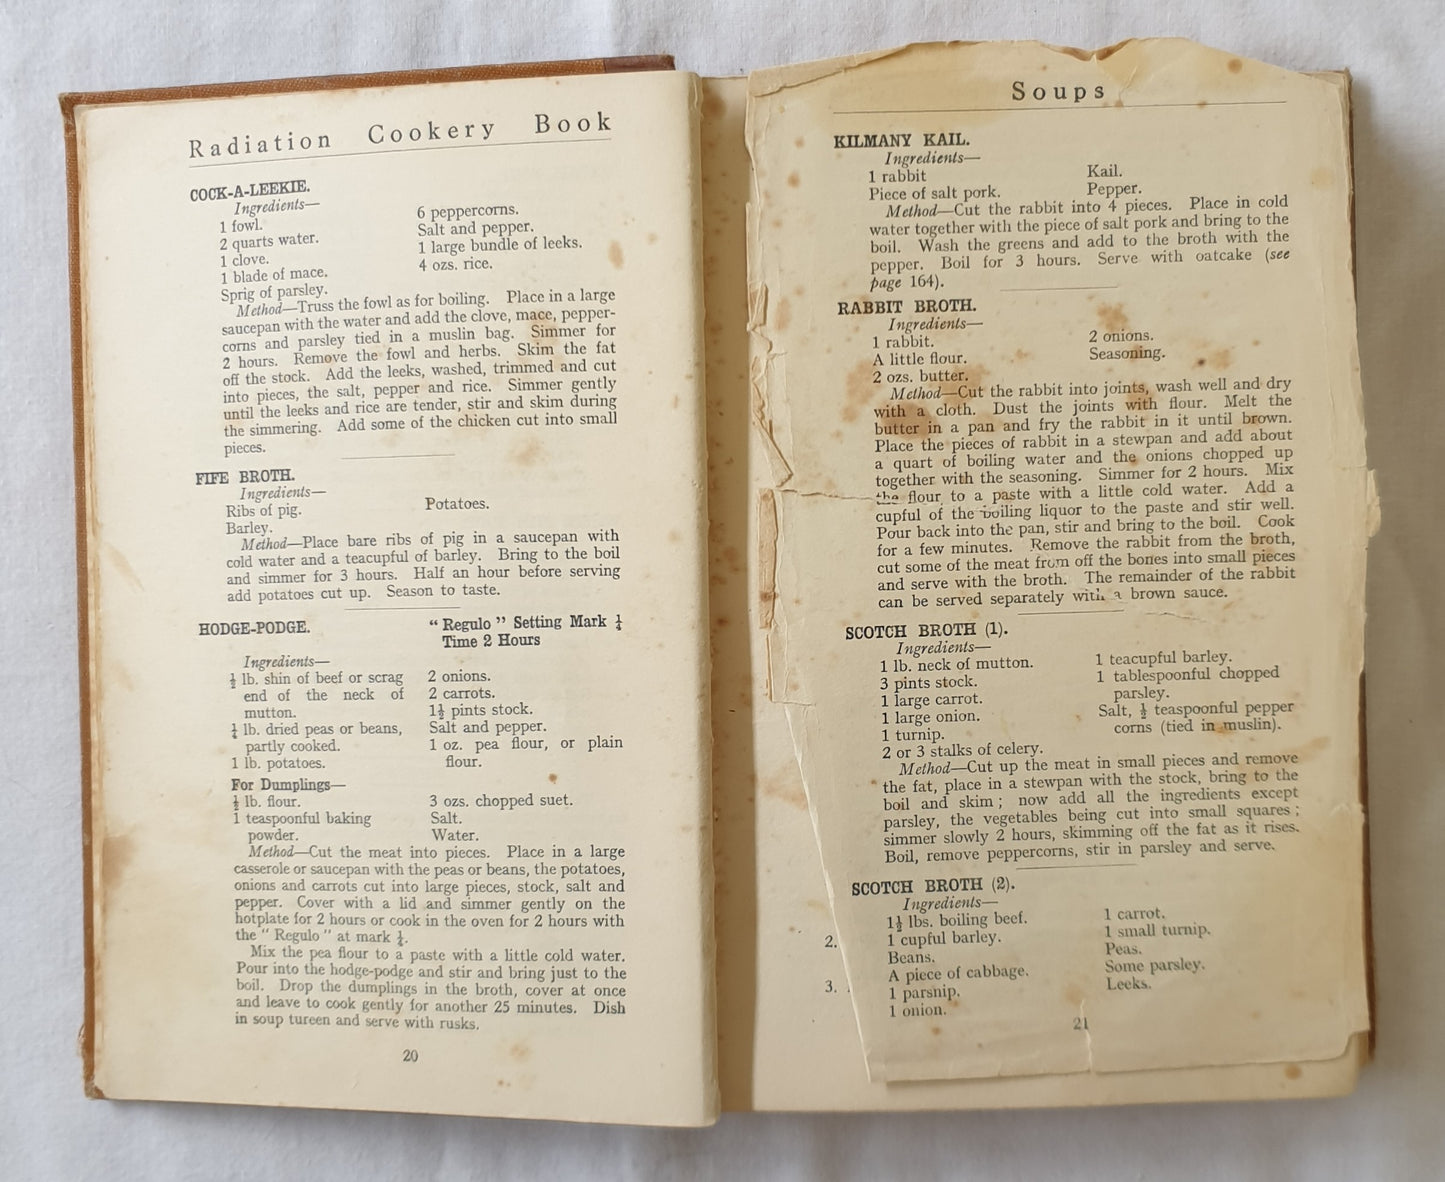 Radiation Cookery Book by Radiation